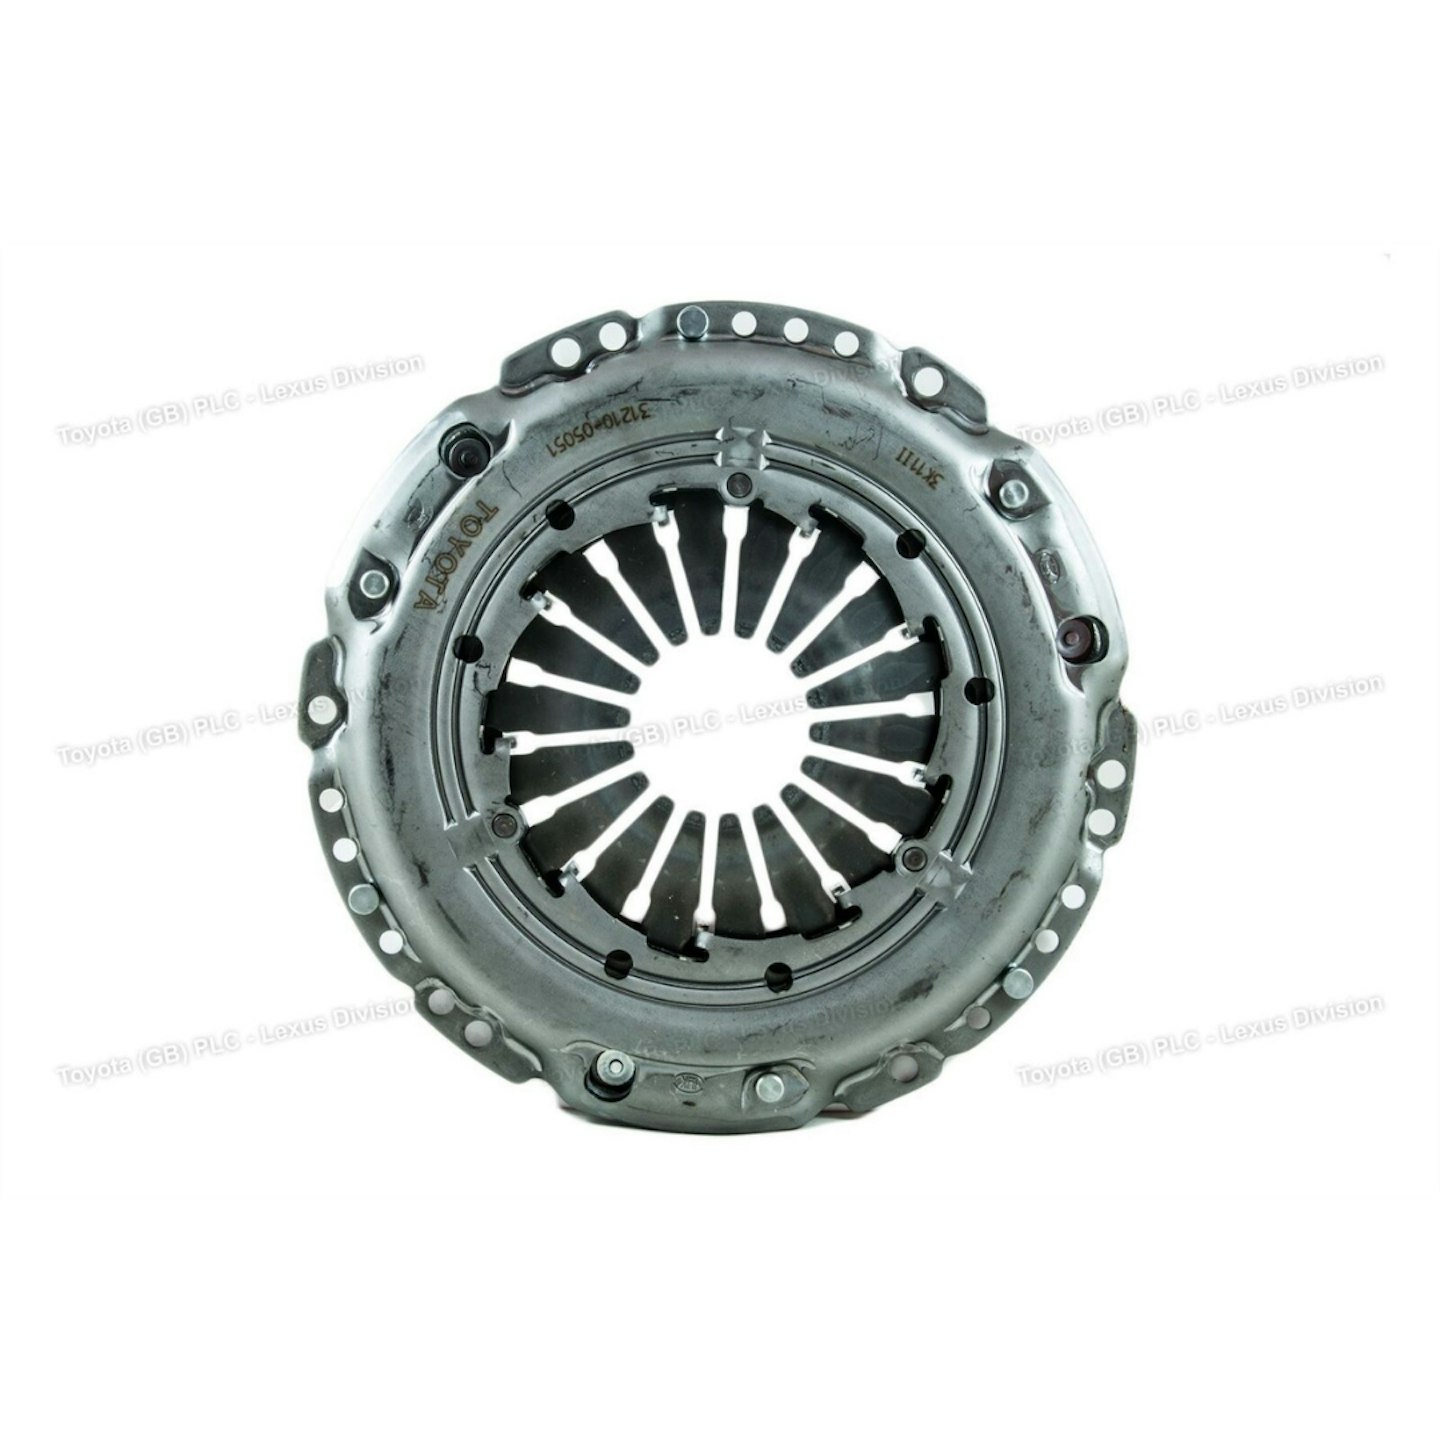 Genuine Toyota AvensisCorollaCorolla Verso Clutch Cover Assembly